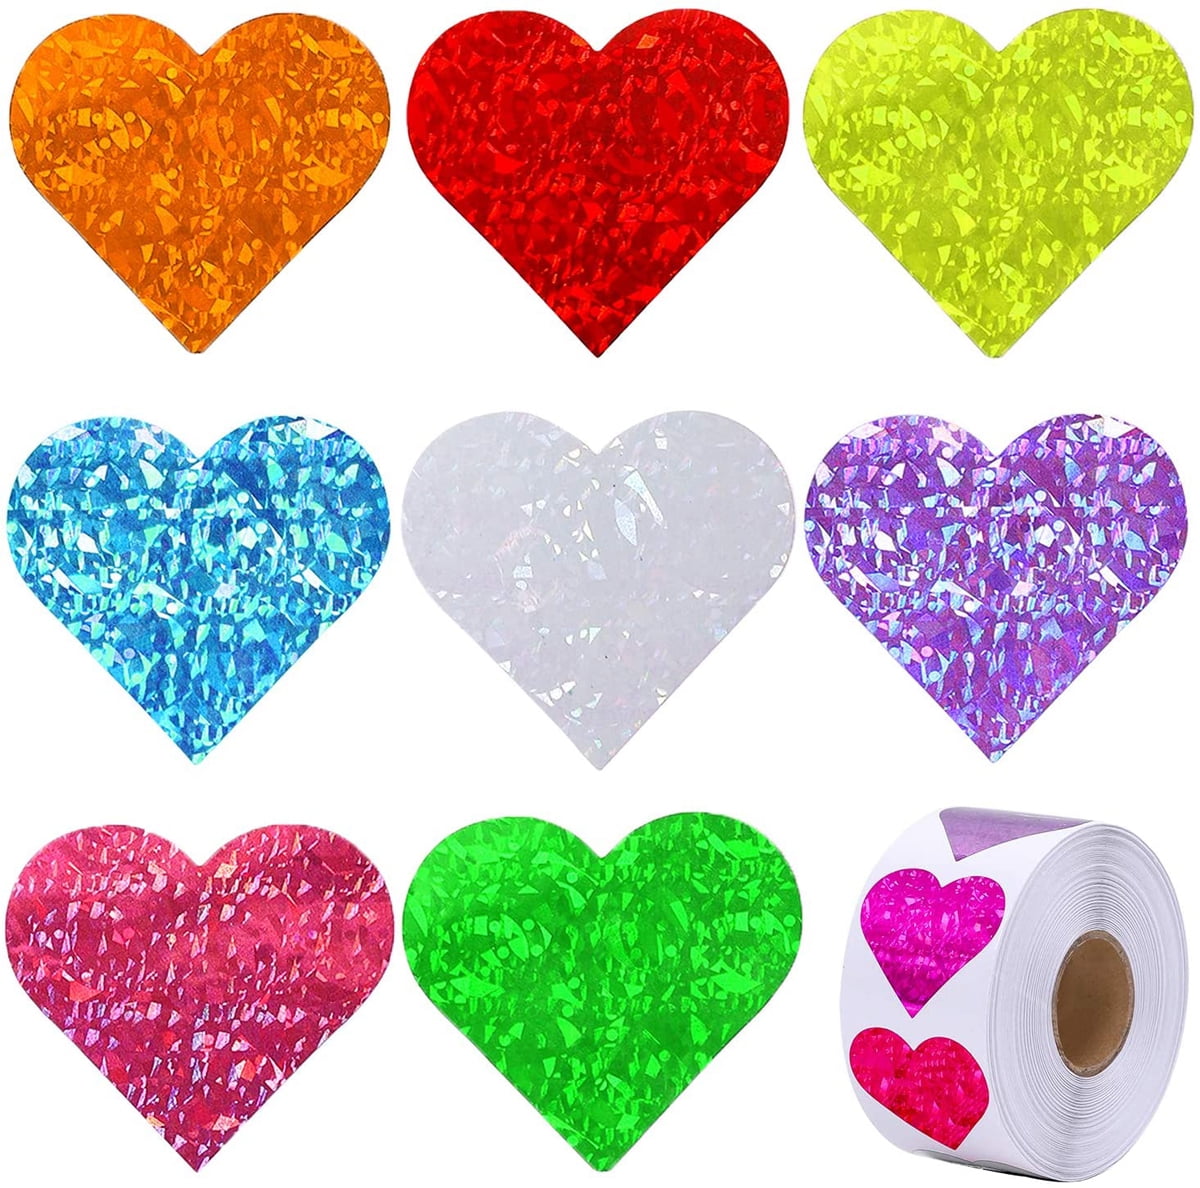 Heart Sticker Multi-color Self-Adhesive Heart-Shaped Stickers